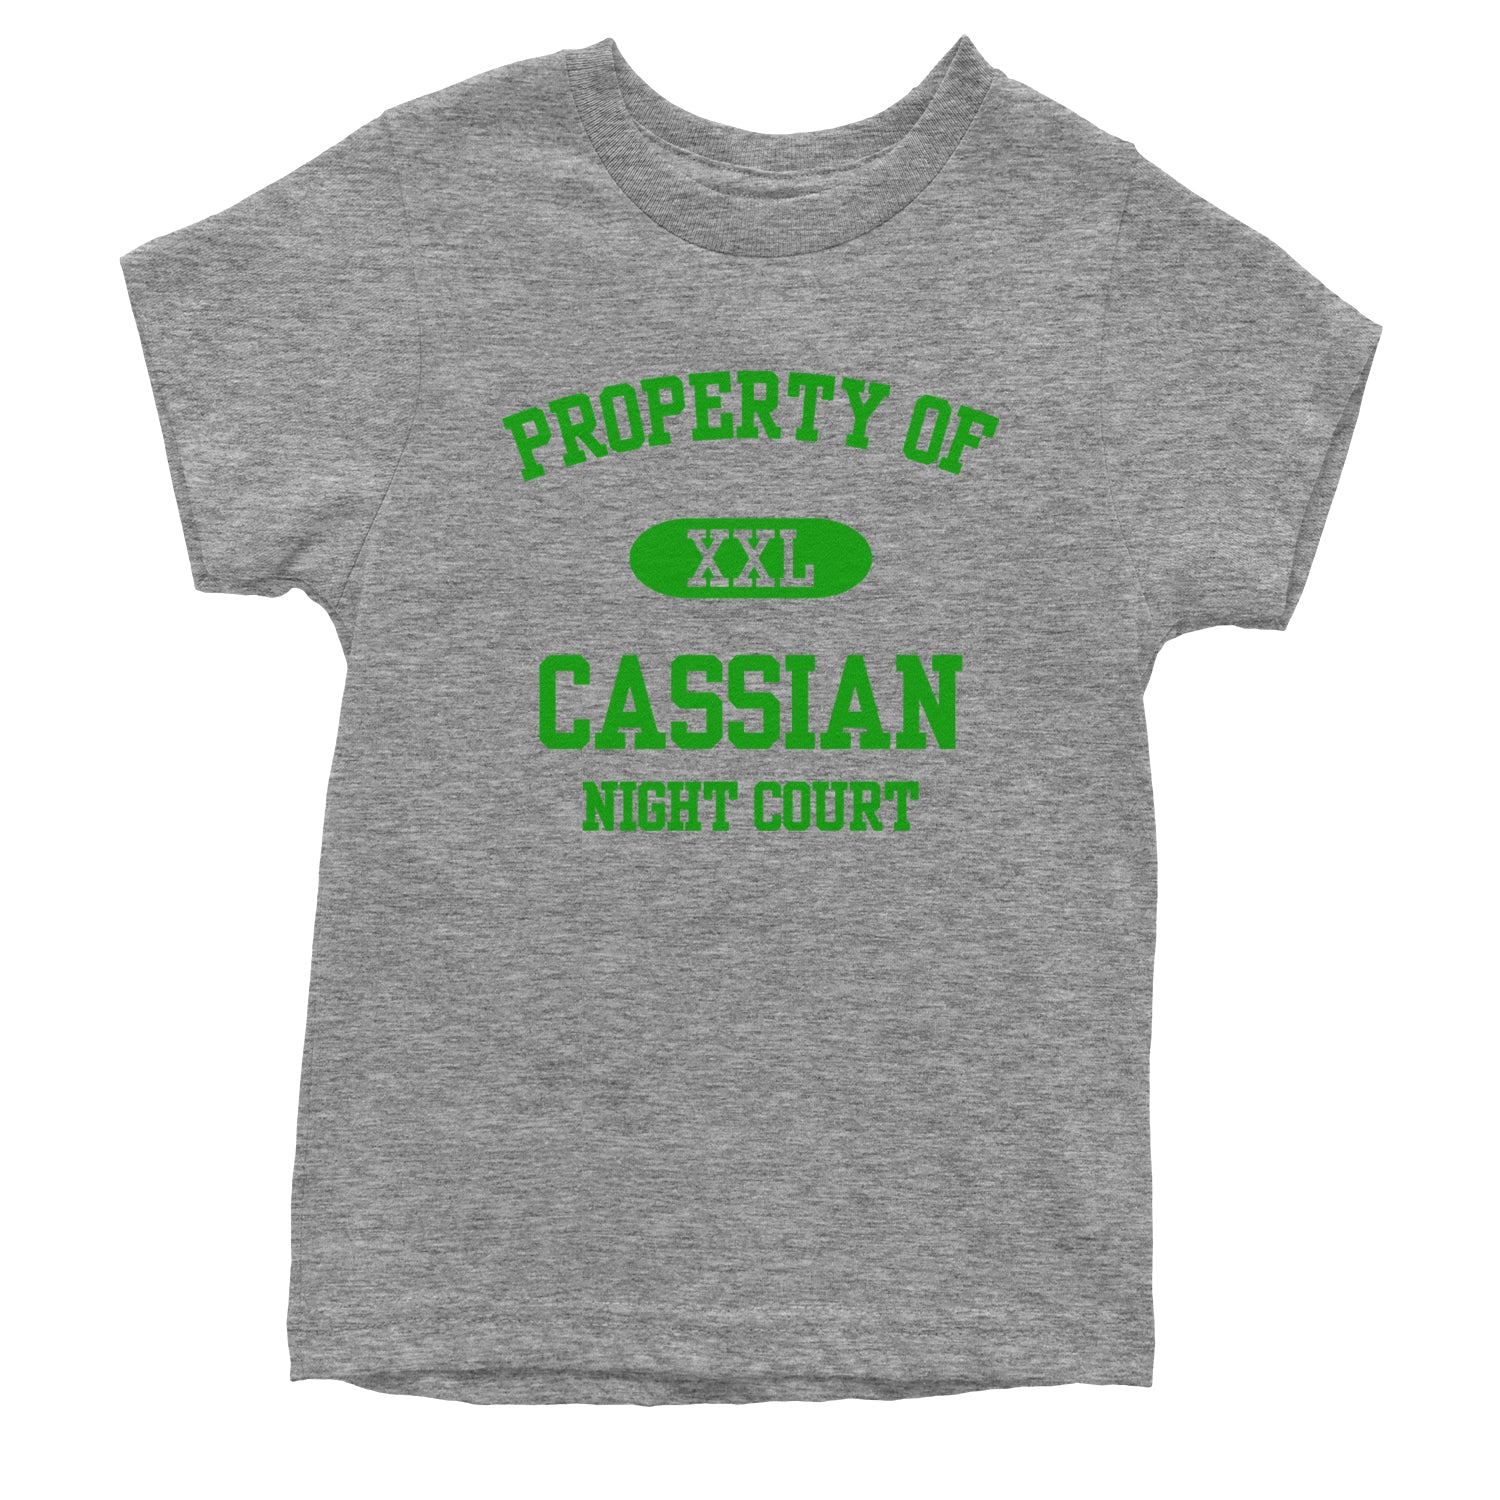 Property Of Cassian ACOTAR Youth T-shirt acotar, court, maas, tamlin, thorns by Expression Tees